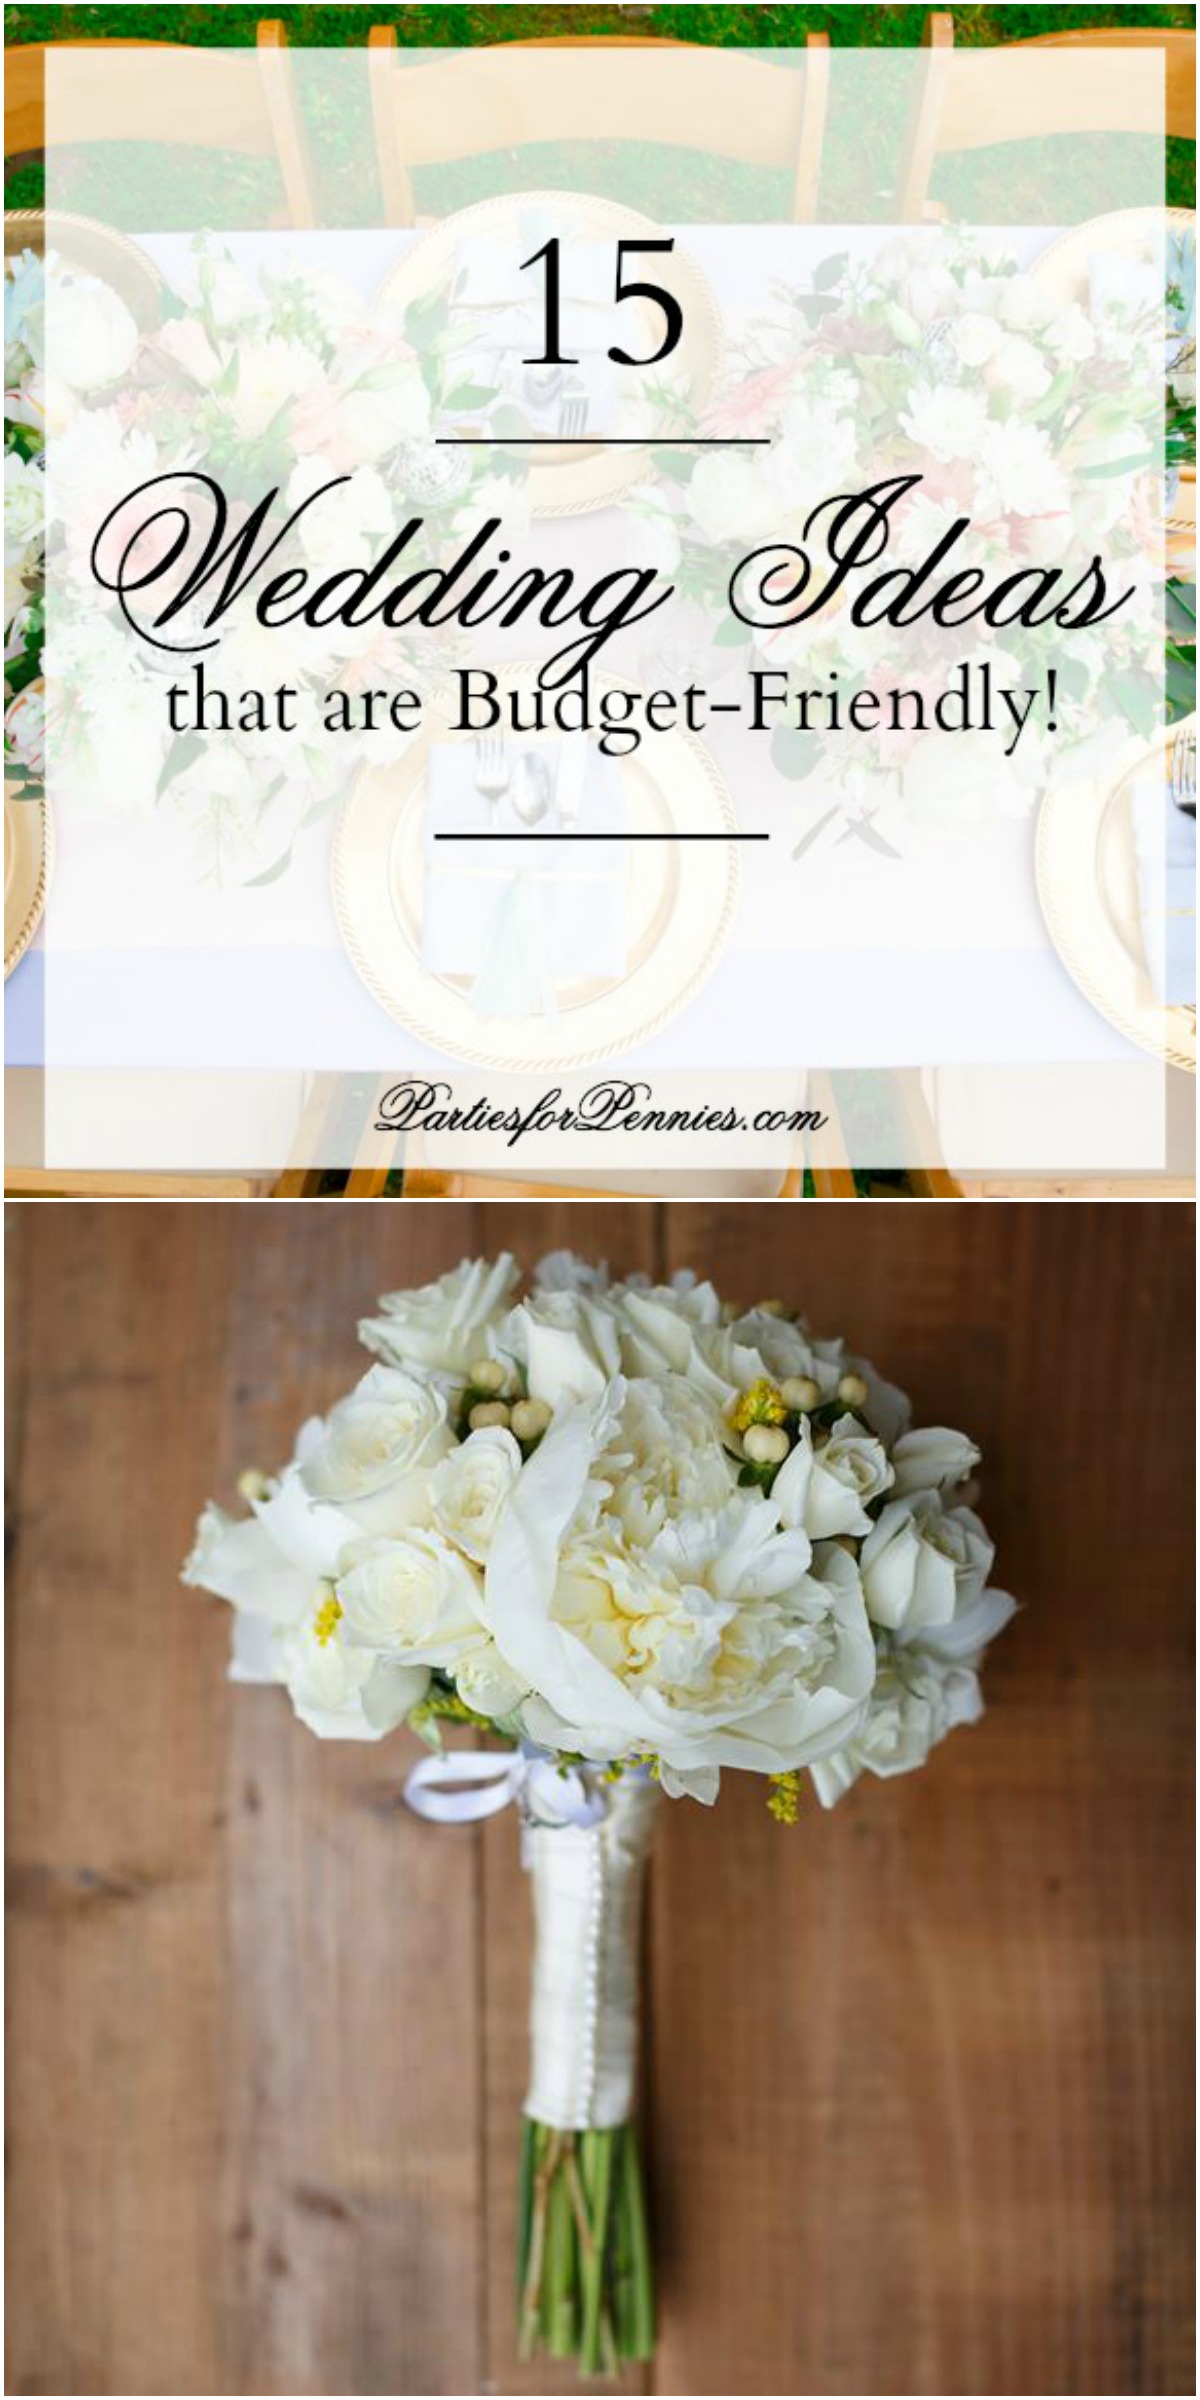 15 Wedding Ideas that are Budget-Friendly by PartiesforPennies.com | Everything you need to know if you're planning a wedding - Invitations, Photography, Wedding Inspiration, Wedding Cakes, and more!